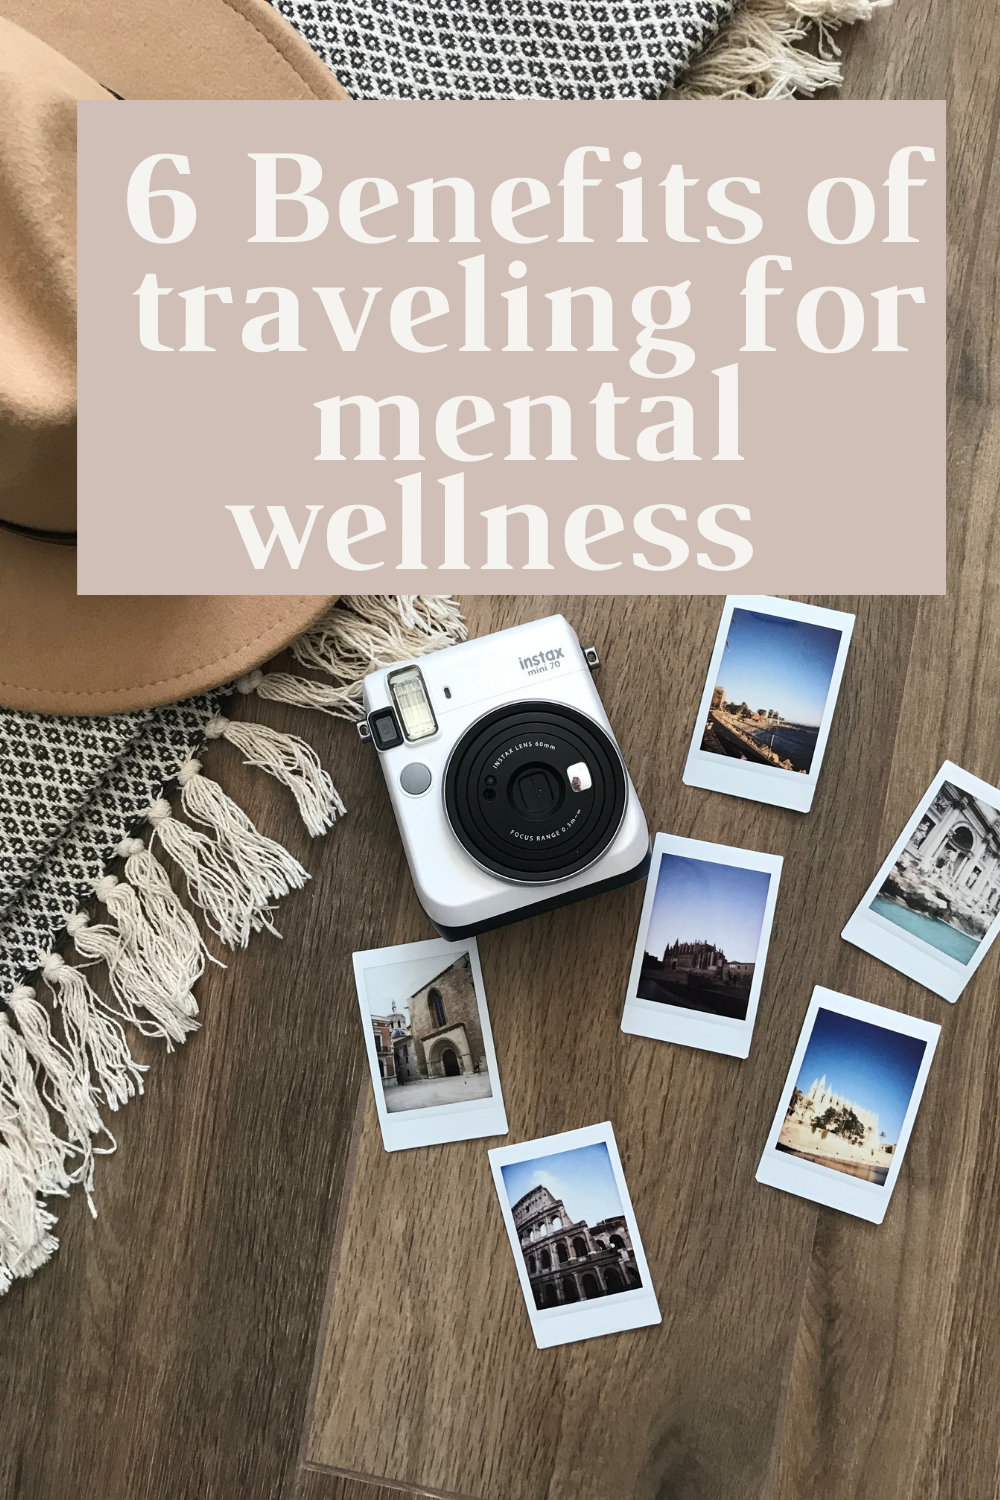 6 Benefits of Traveling for mental wellness